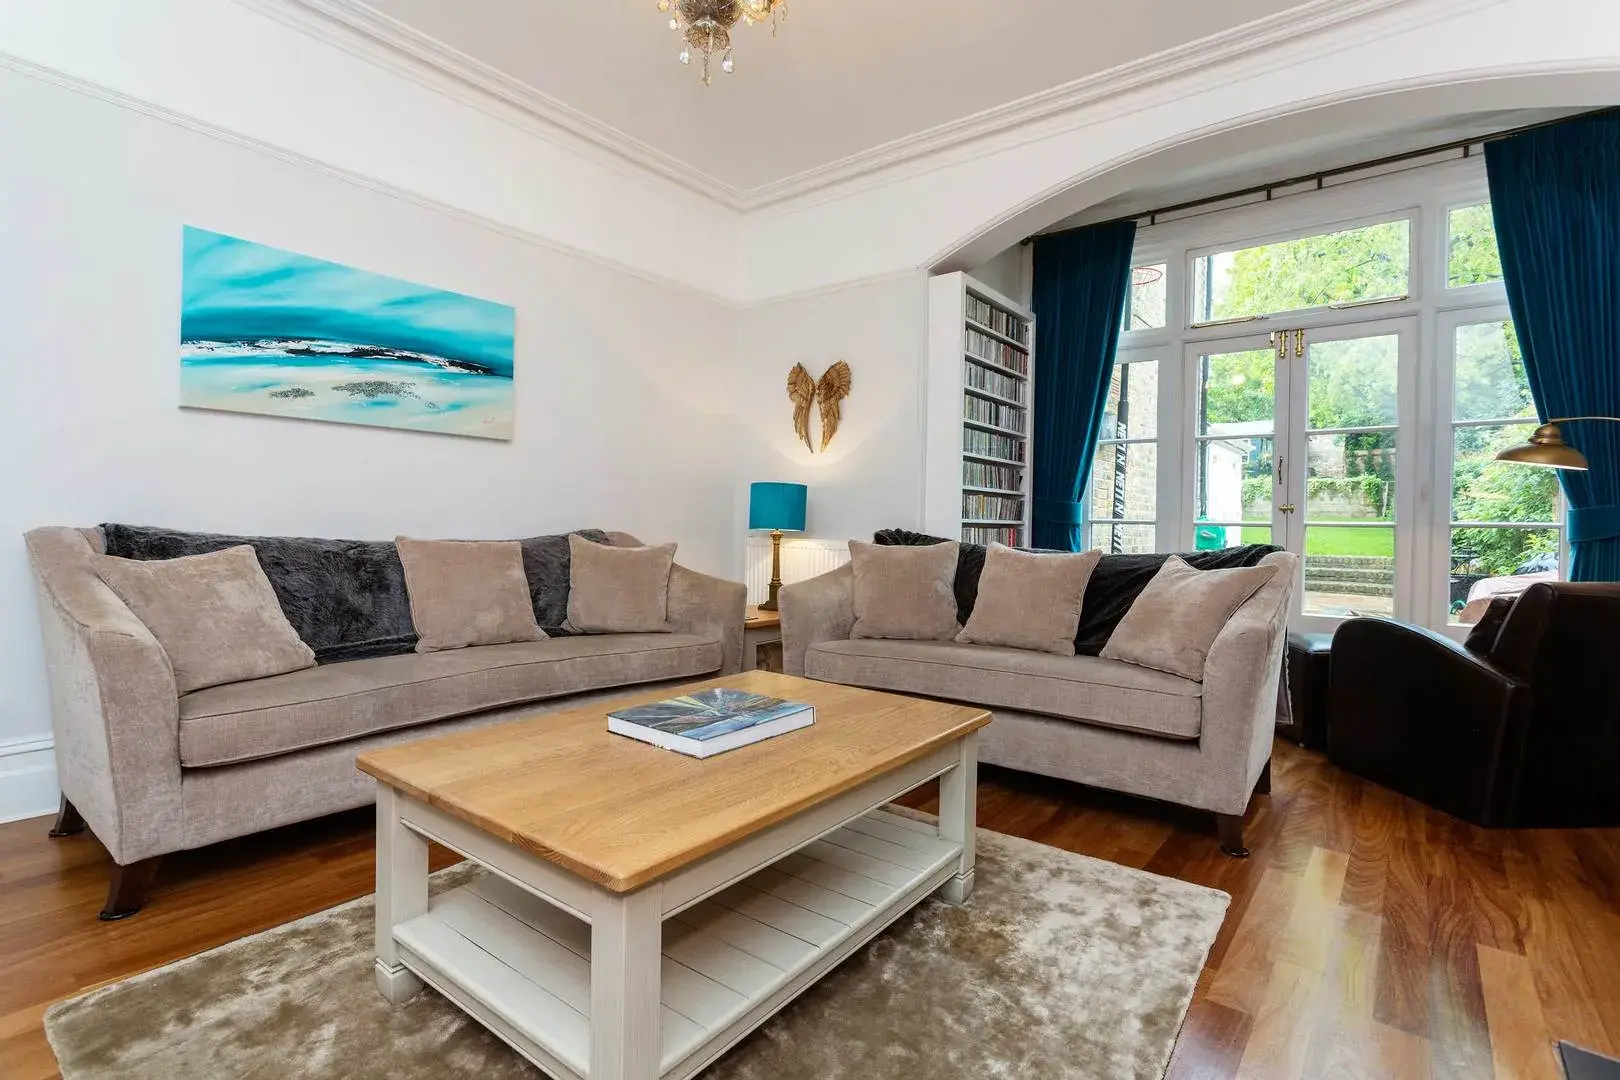 Vineyard Hill Road, holiday home in Wimbledon – South London, London